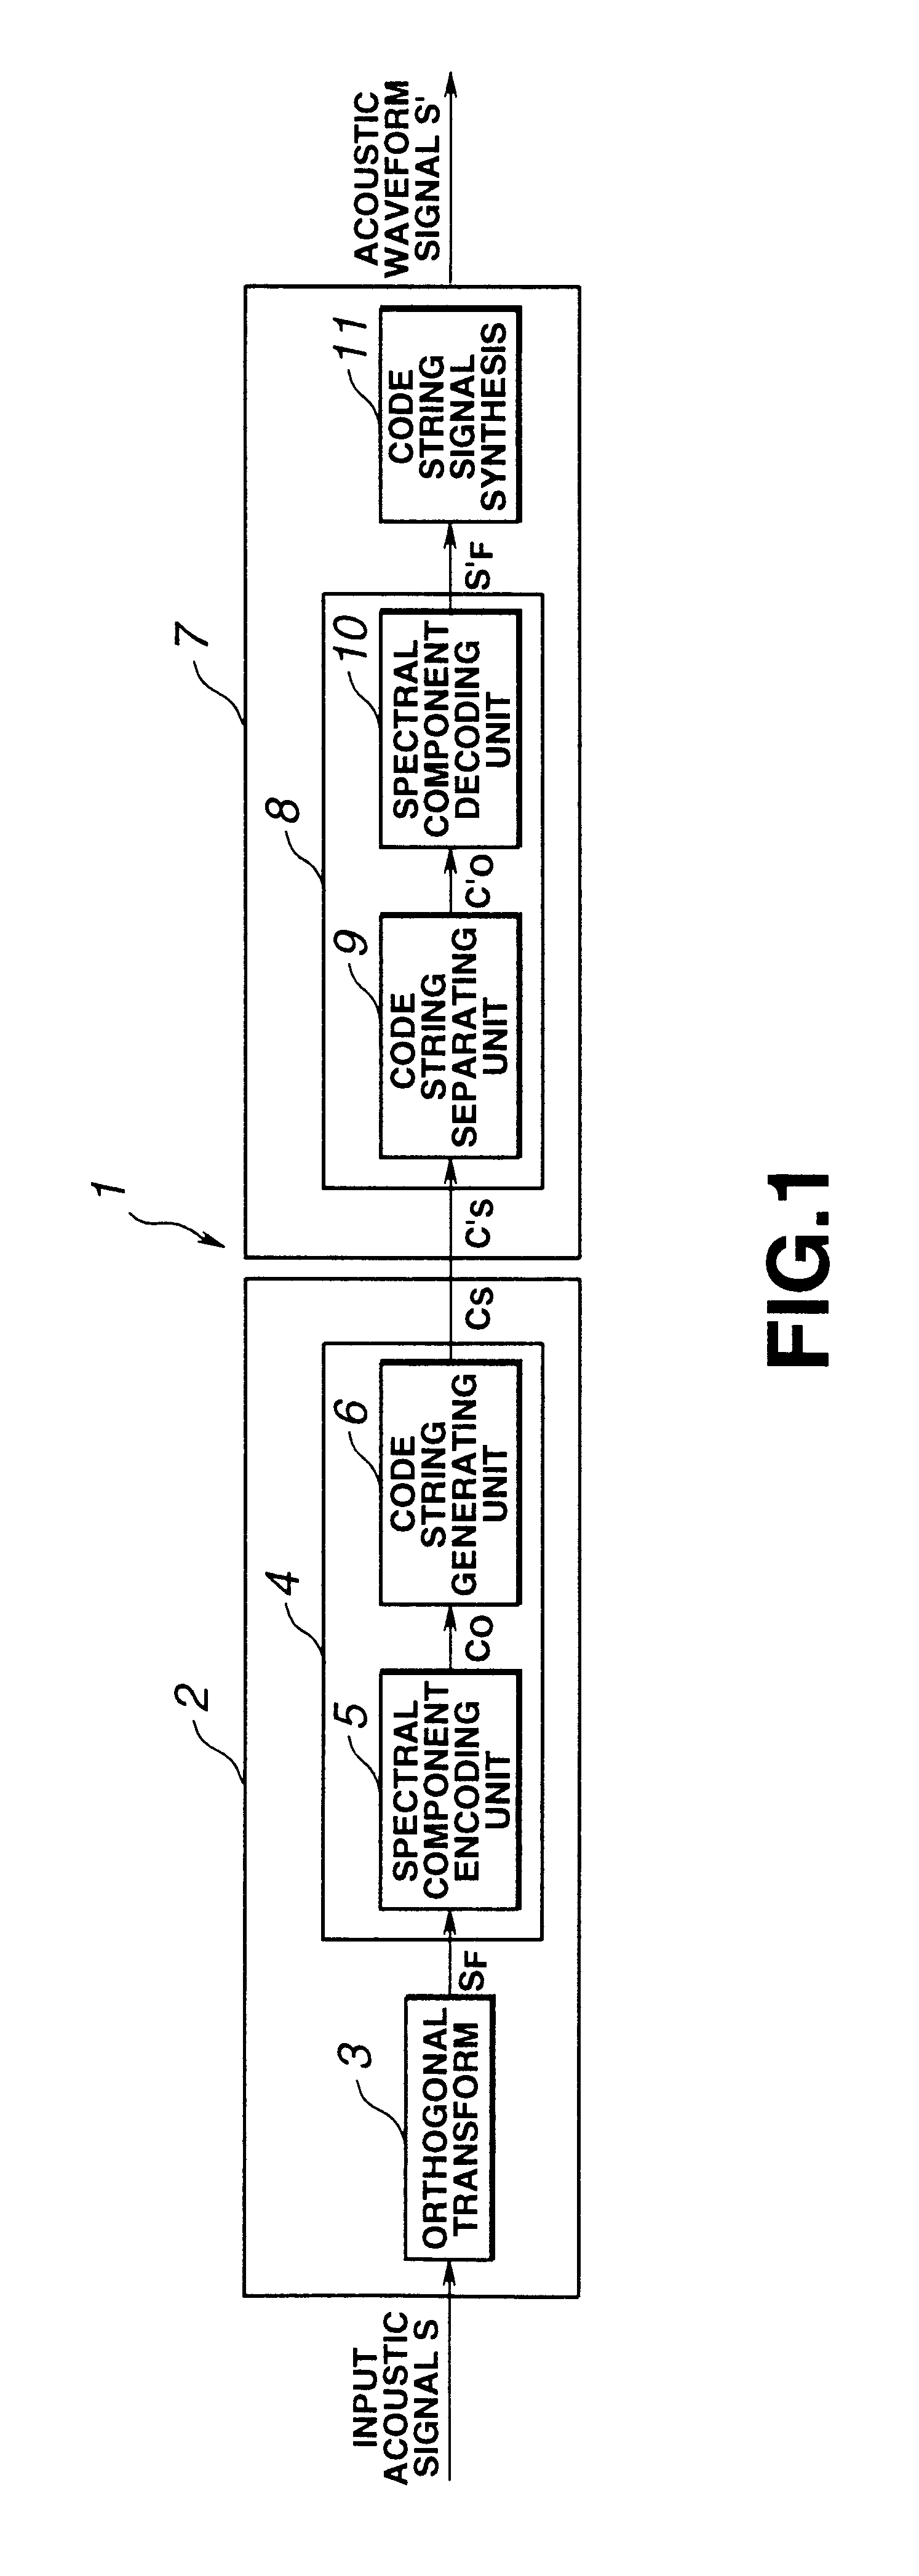 Signal encoding and decoding system